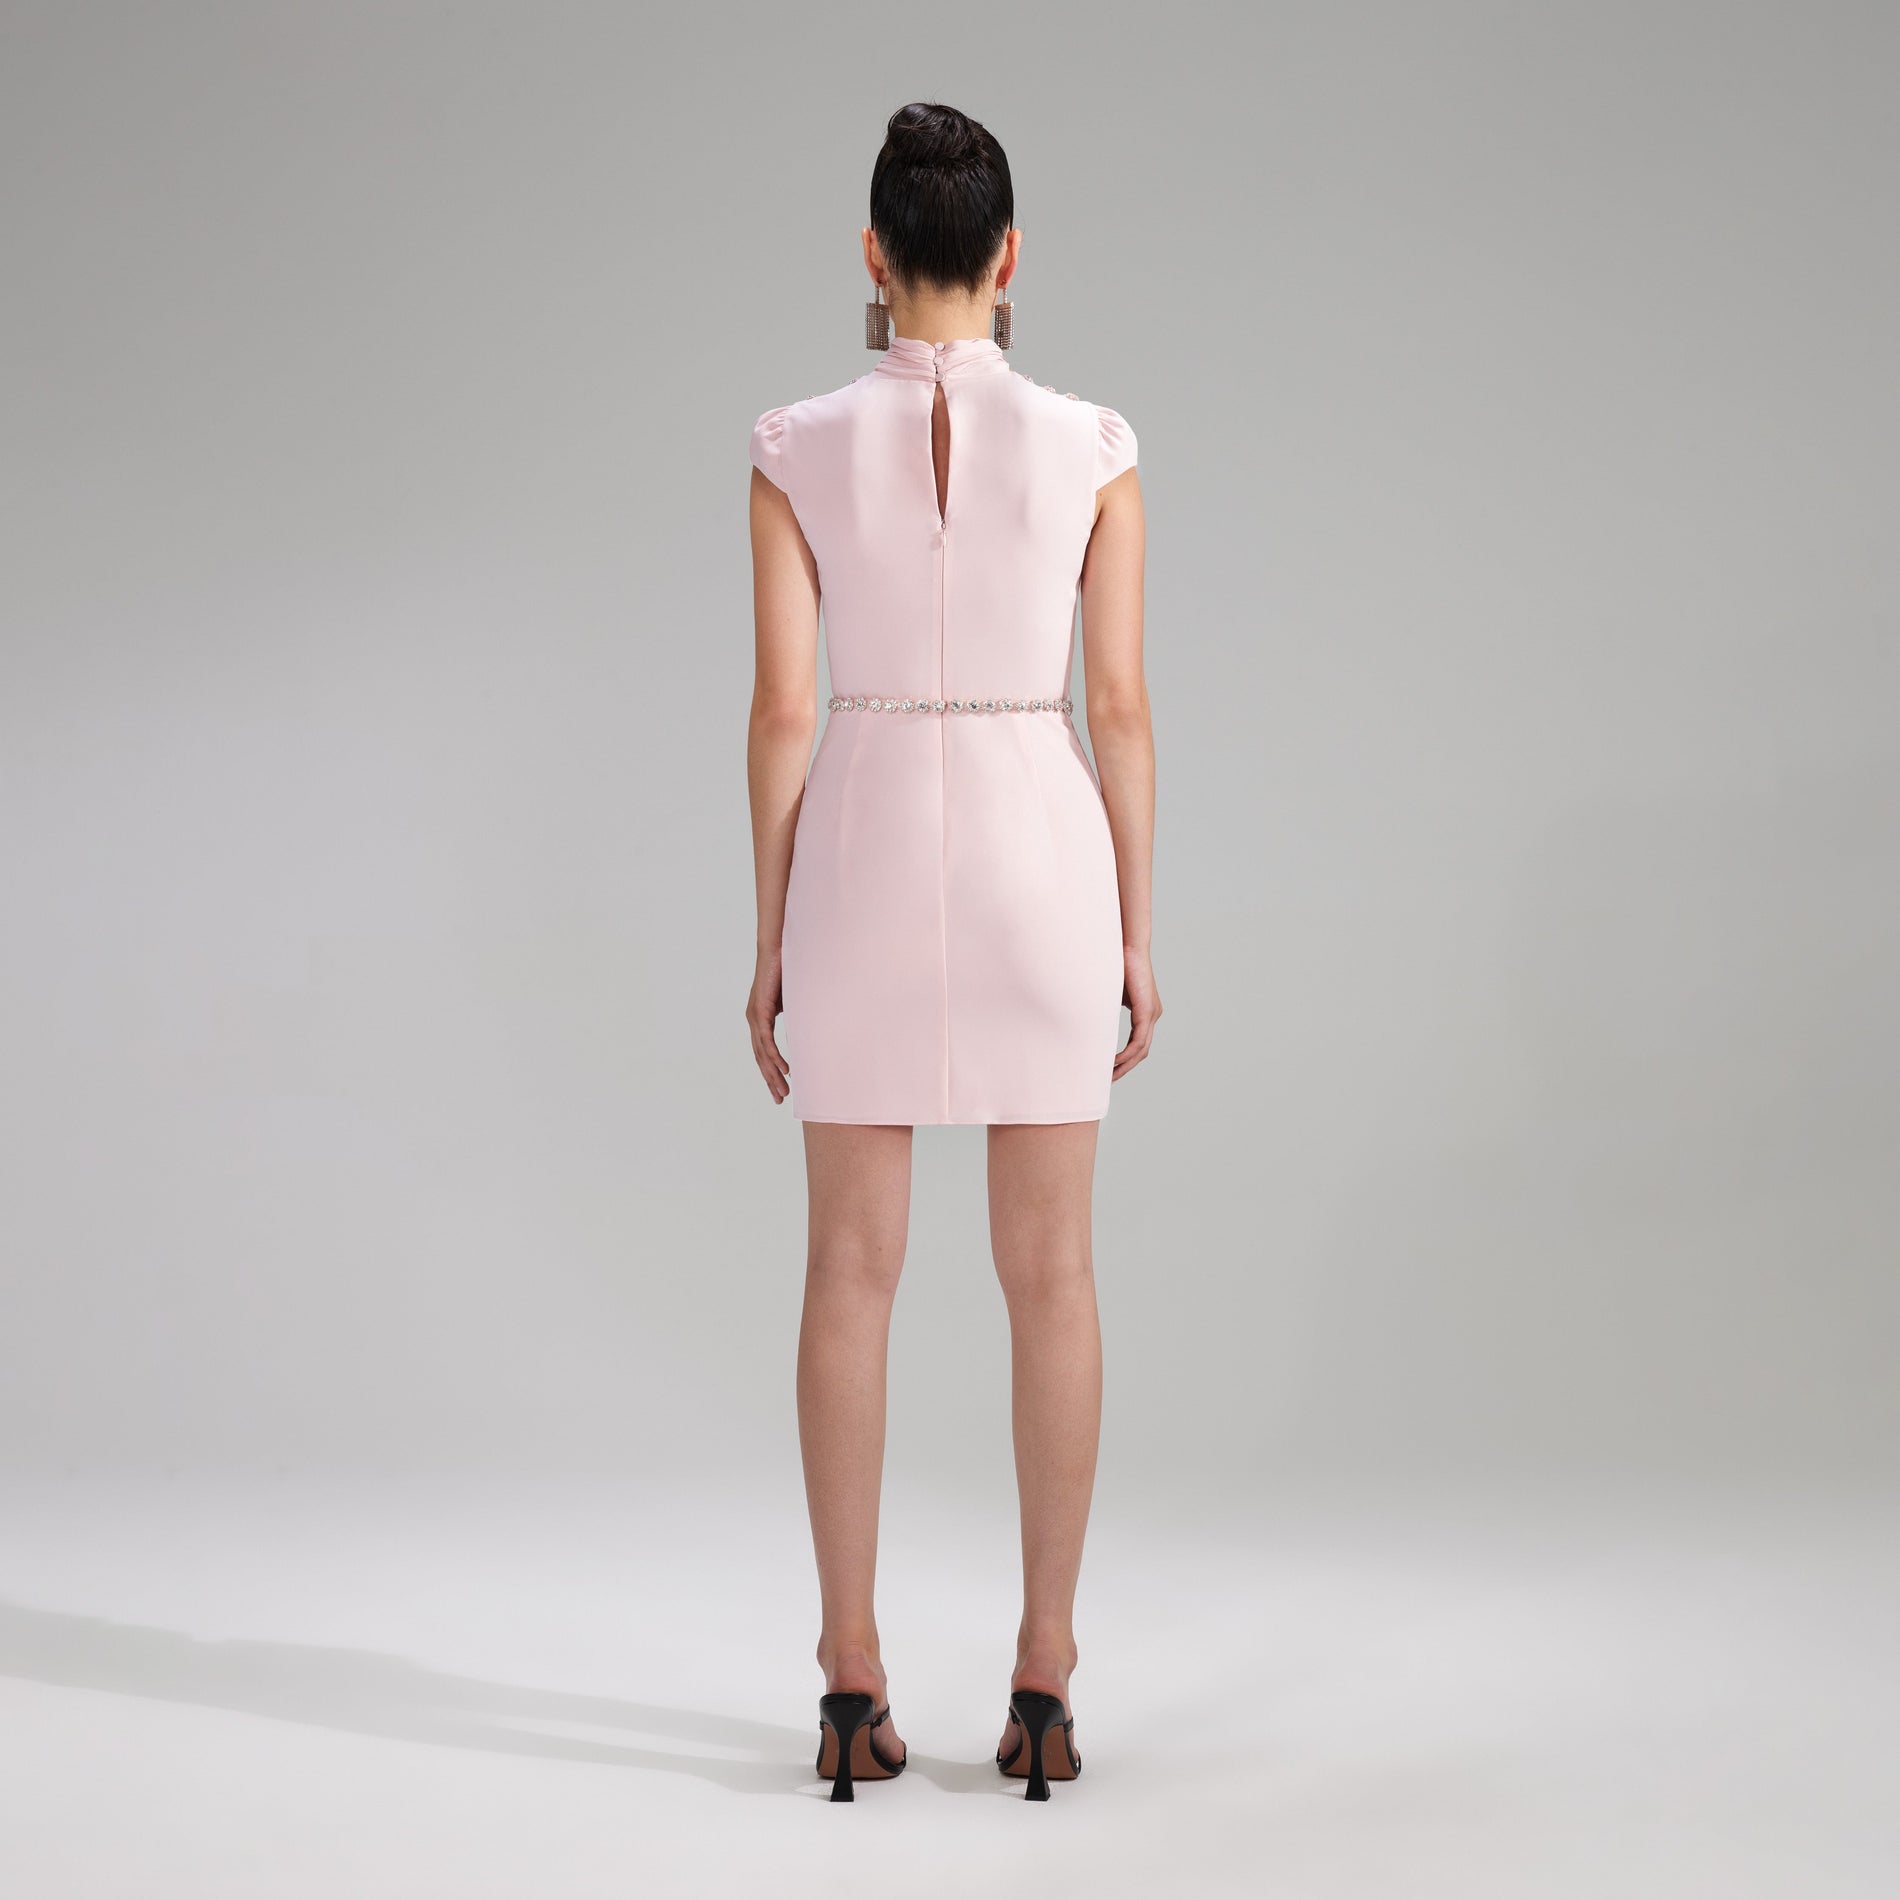 A woman wearing the Pink Stretch Crepe Ruched Mini Dress